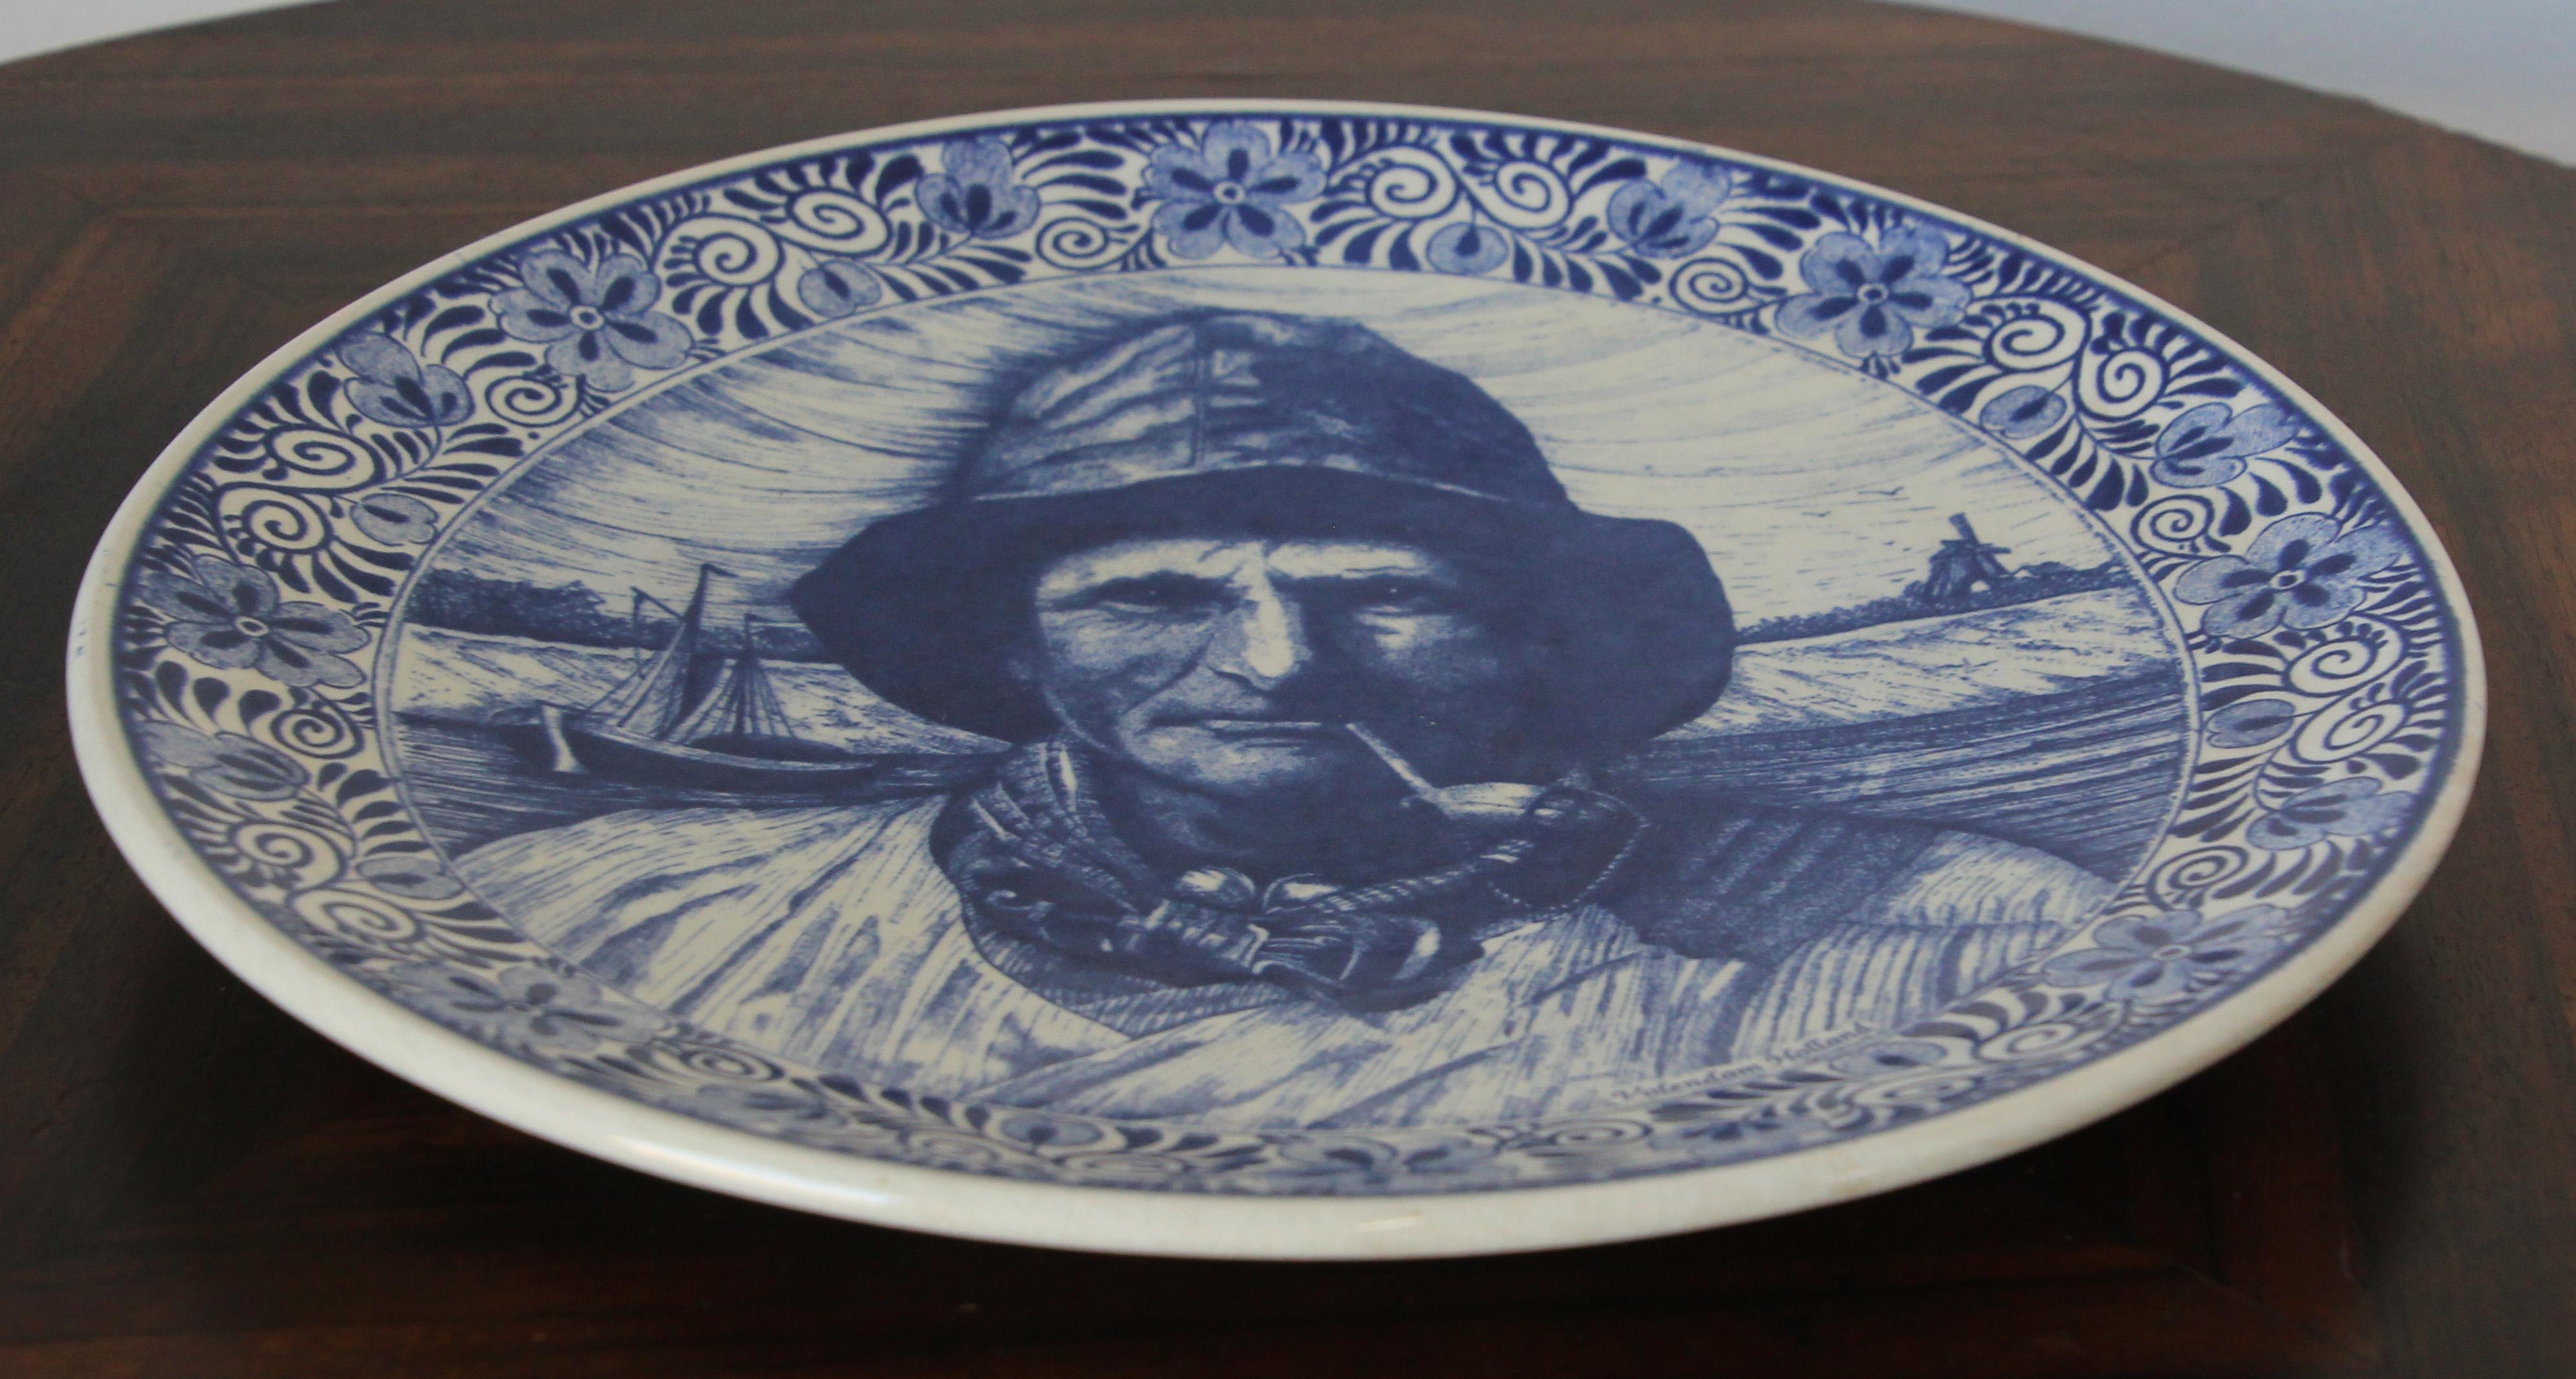 Stunning large vintage Dutch Holland Delfts blue and white decorative plate.
Beautiful charger, the painting depicts a fisherman smoking a pipe.
 It is signed by the artist, 